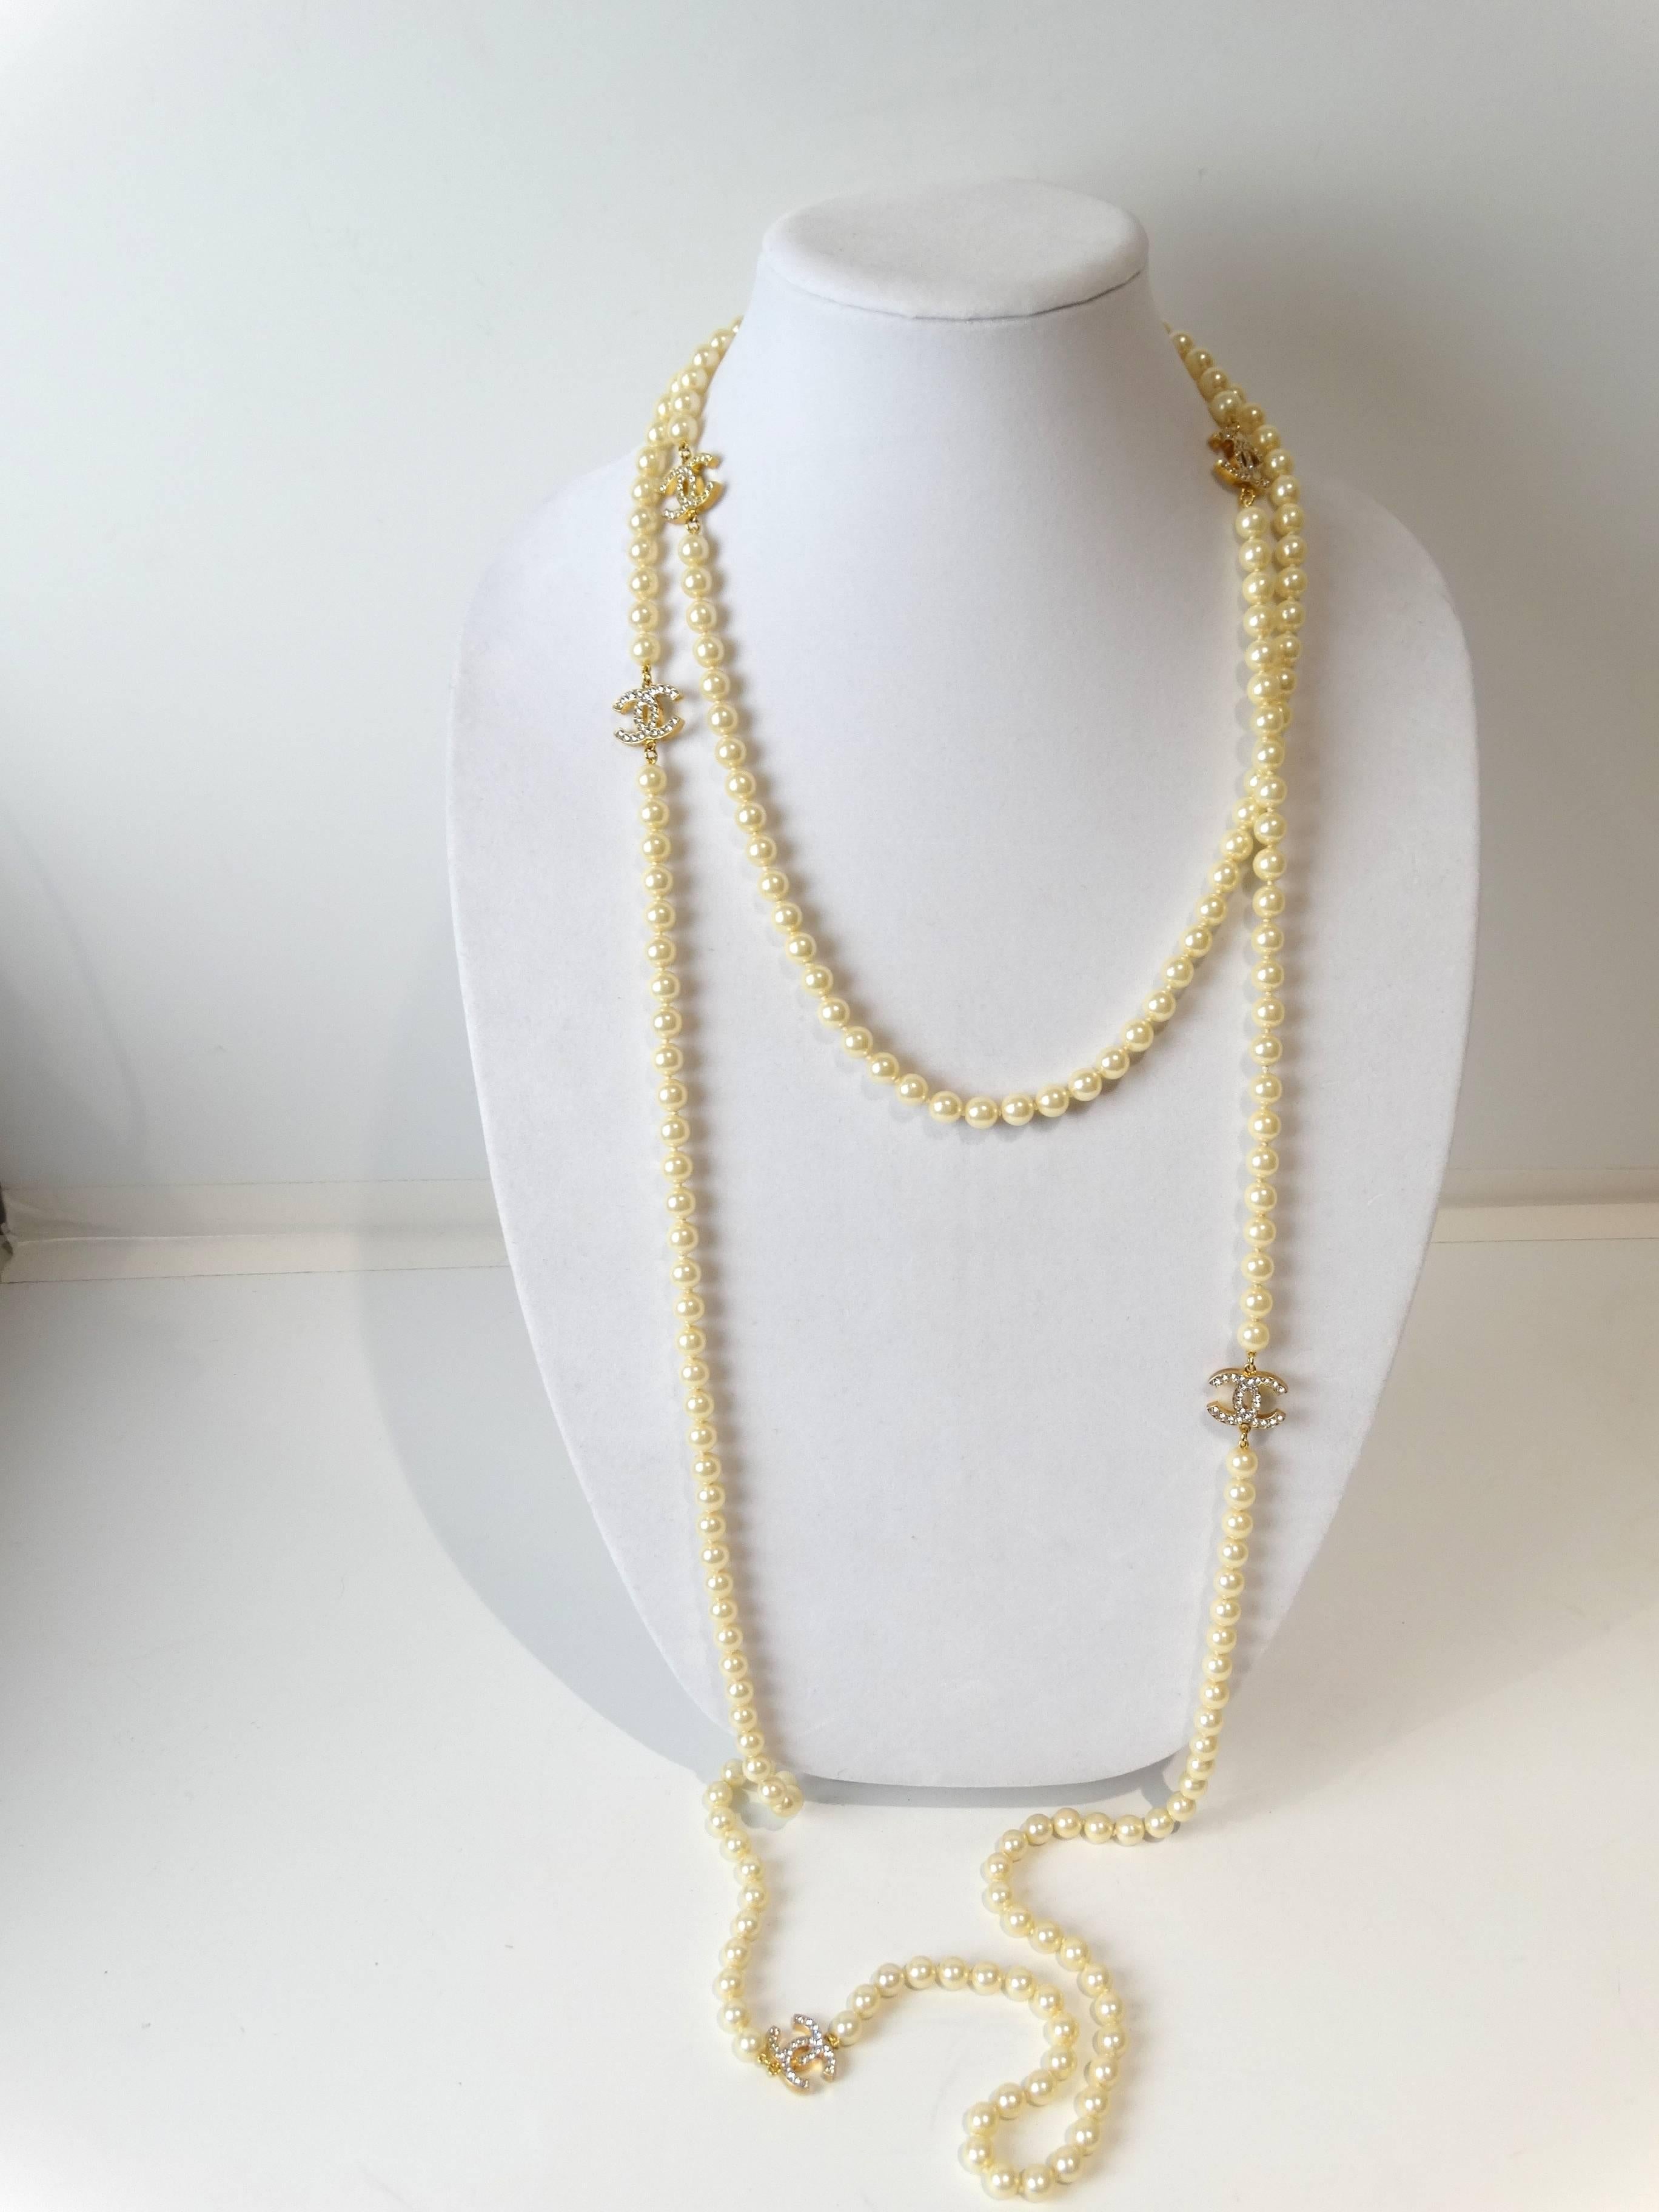 Women's Vintage Chanel 5CC Pearl Necklace with Rhinestones